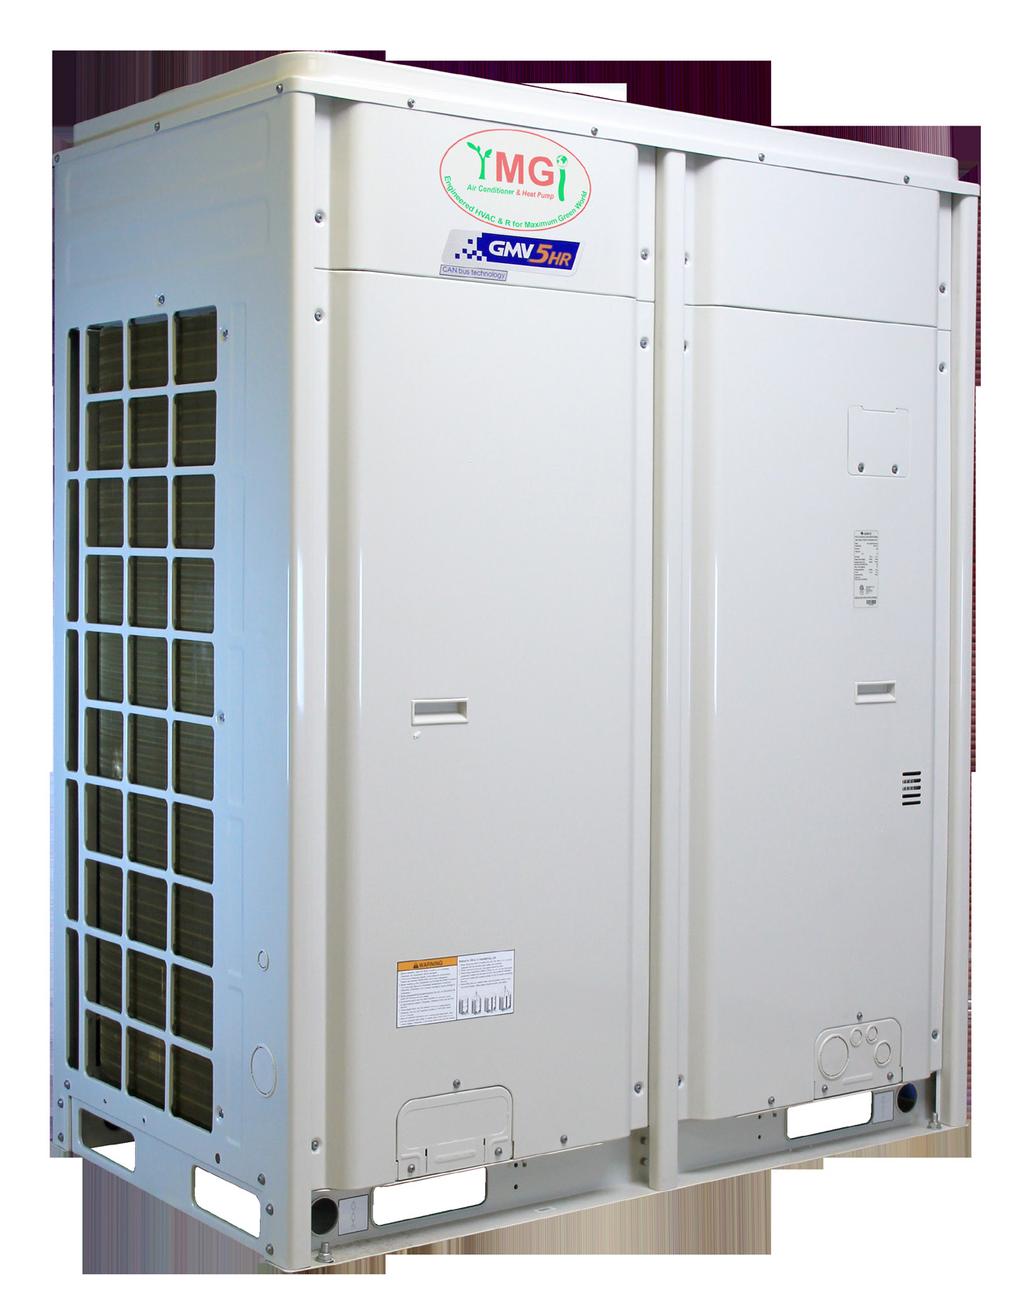 With YMGI s Heat Recovery VRF System, you can use the same system to simultaneously heat and cool multiple